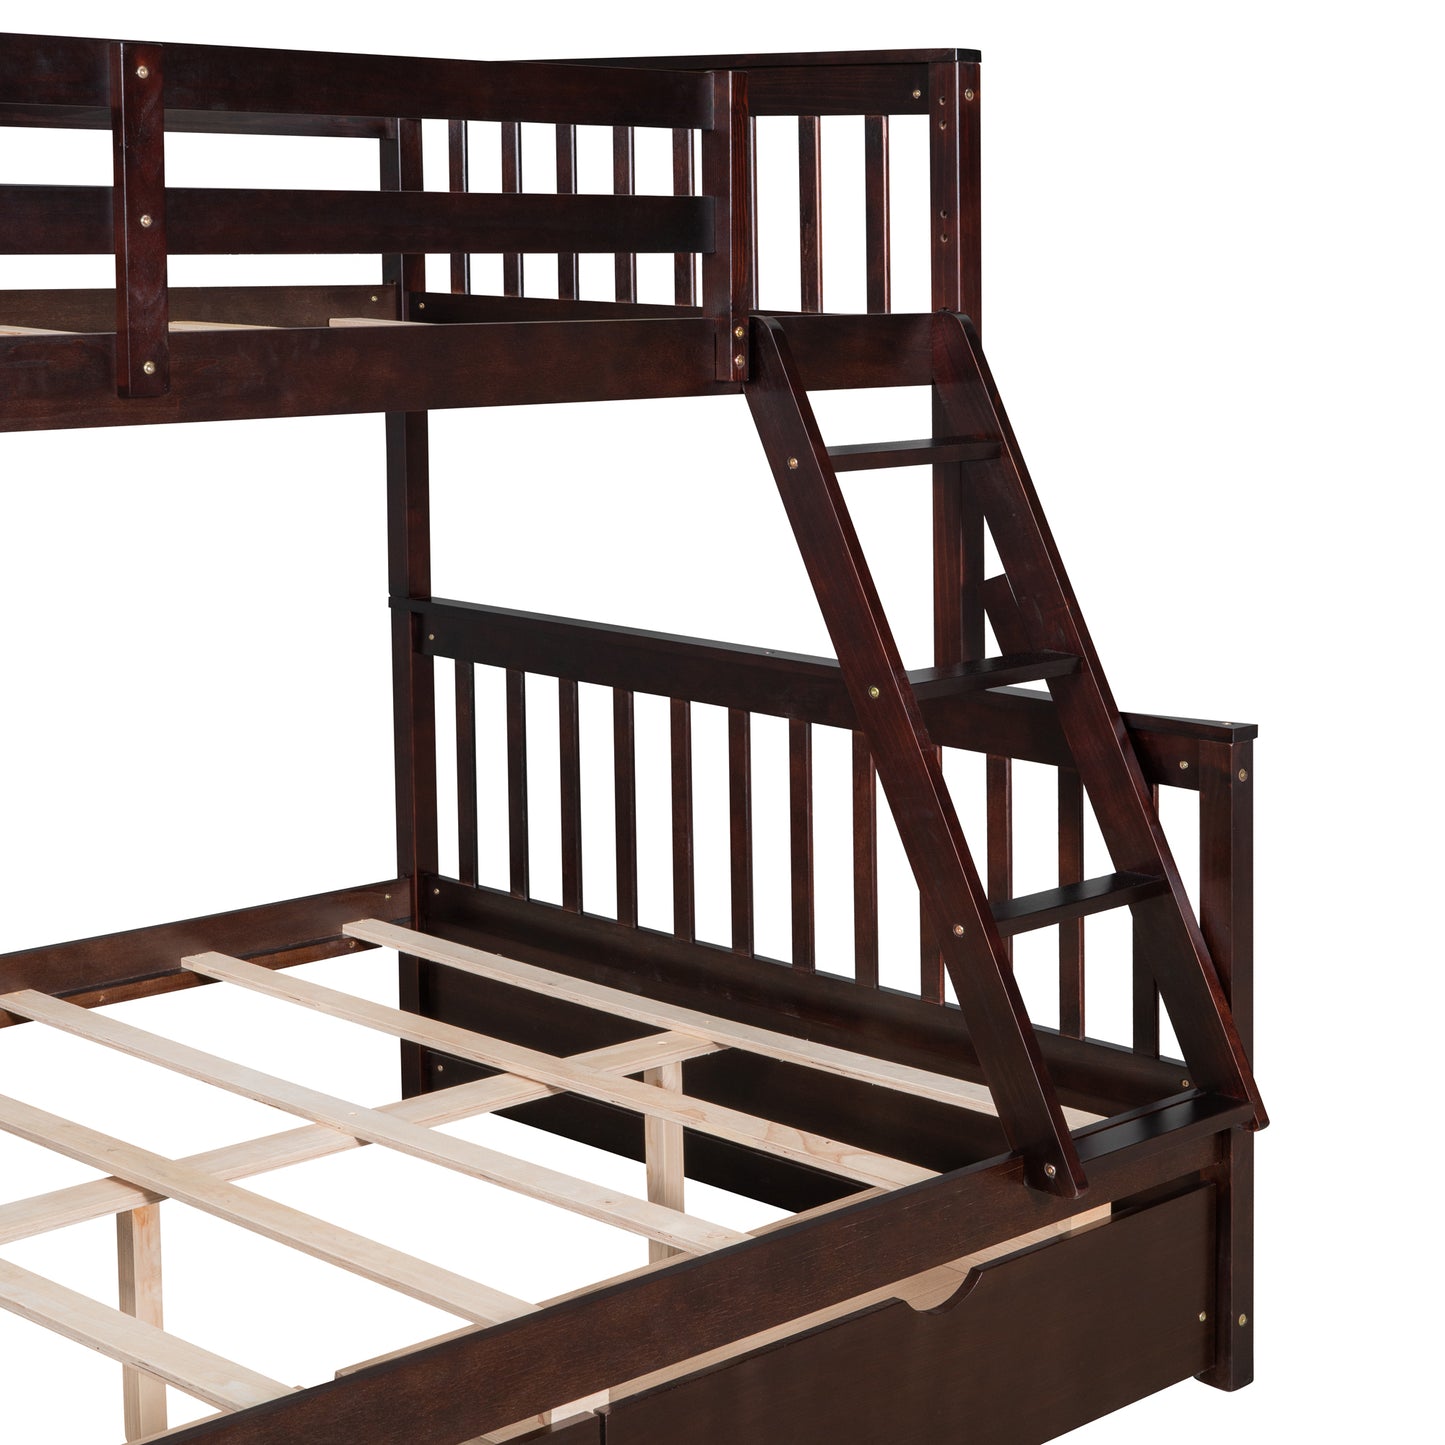 Twin-Over-Full Bunk Bed with Ladders and Two Storage Drawers(Espresso)